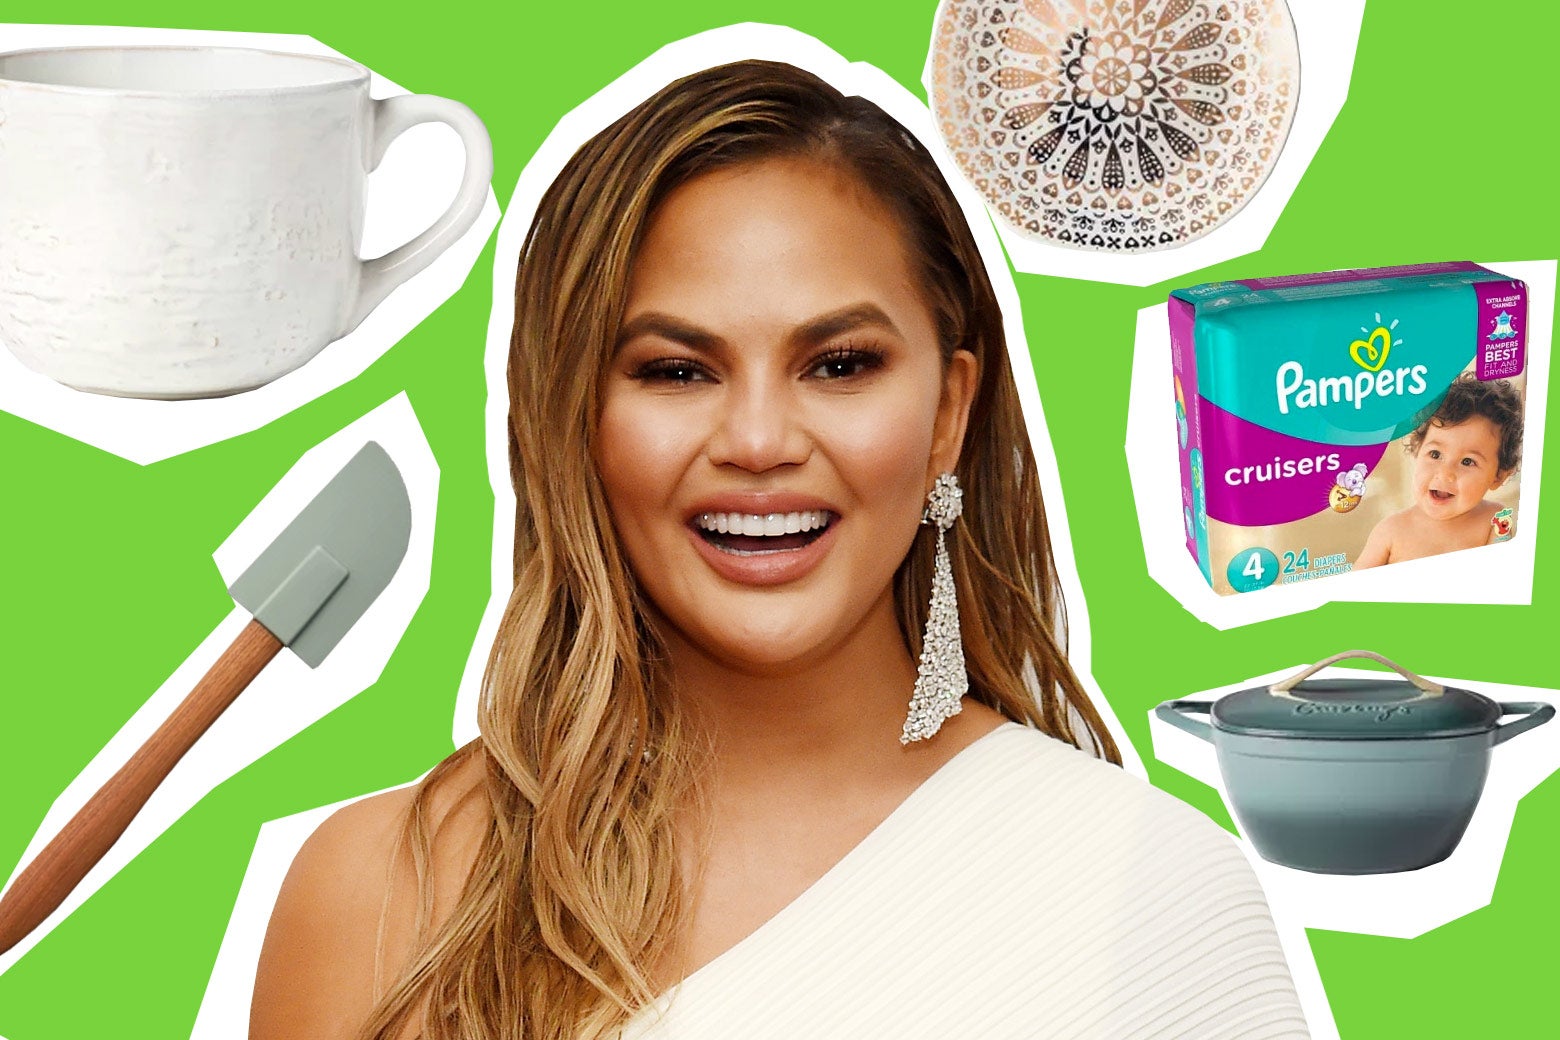 Chrissy Teigen, surrounded by products she endorses.